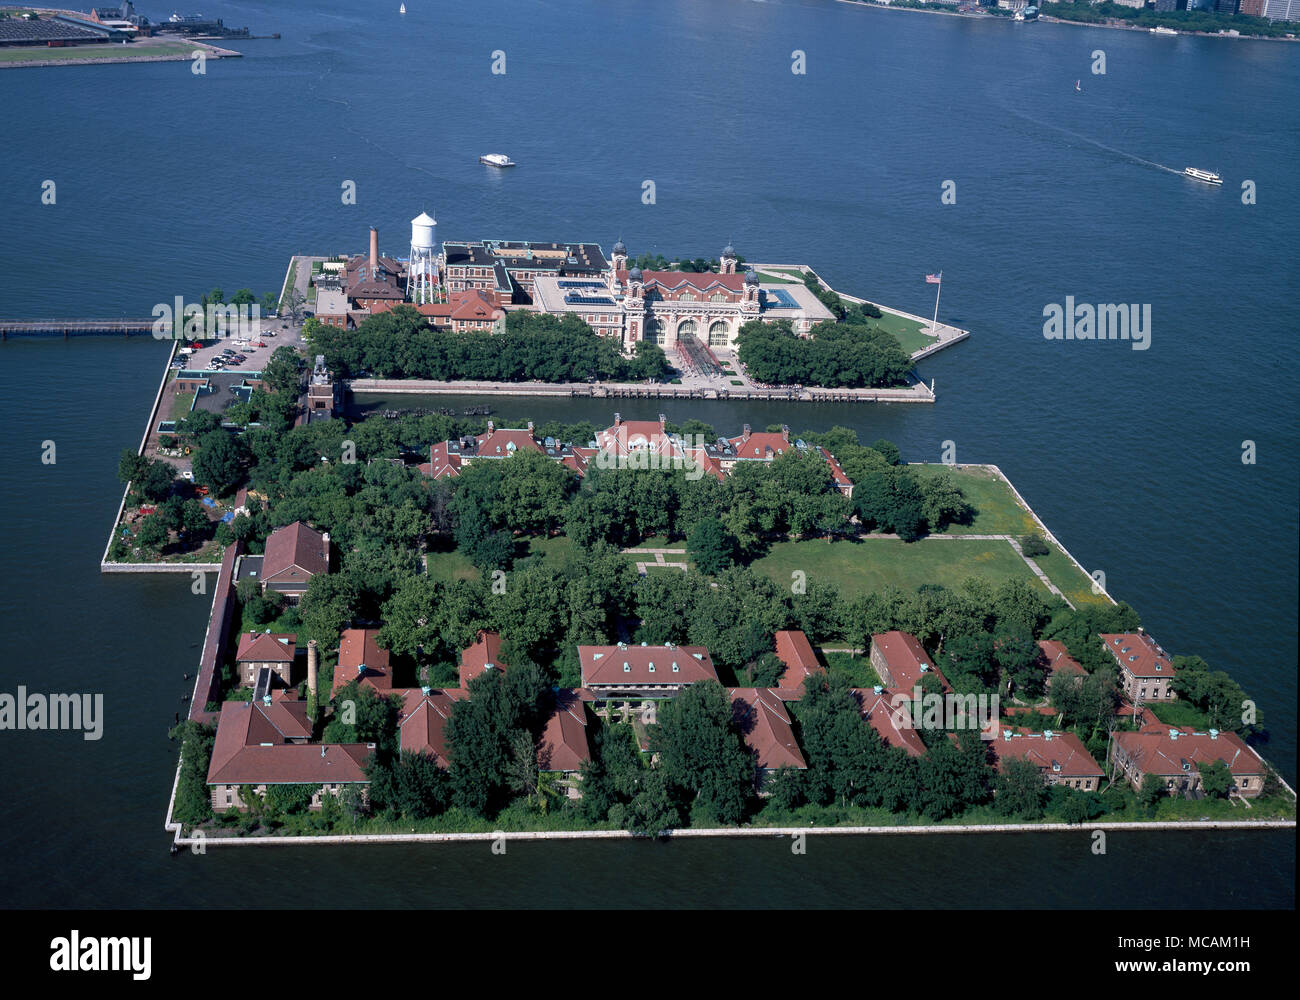 Ellis Island, in Upper New York Bay, was the gateway for millions of immigrants to the United States as the nation's busiest immigrant inspection station from 1892 until 1954. The island was greatly expanded with land reclamation between 1892 and 1934. Before that, the much smaller original island was the site of Fort Gibson and later a naval magazine. The island was made part of the Statue of Liberty National Monument in 1965, and has hosted a museum of immigration since 1990. Long considered part of New York, a 1998 United States Supreme Court decision found that most of the island is in New Stock Photo